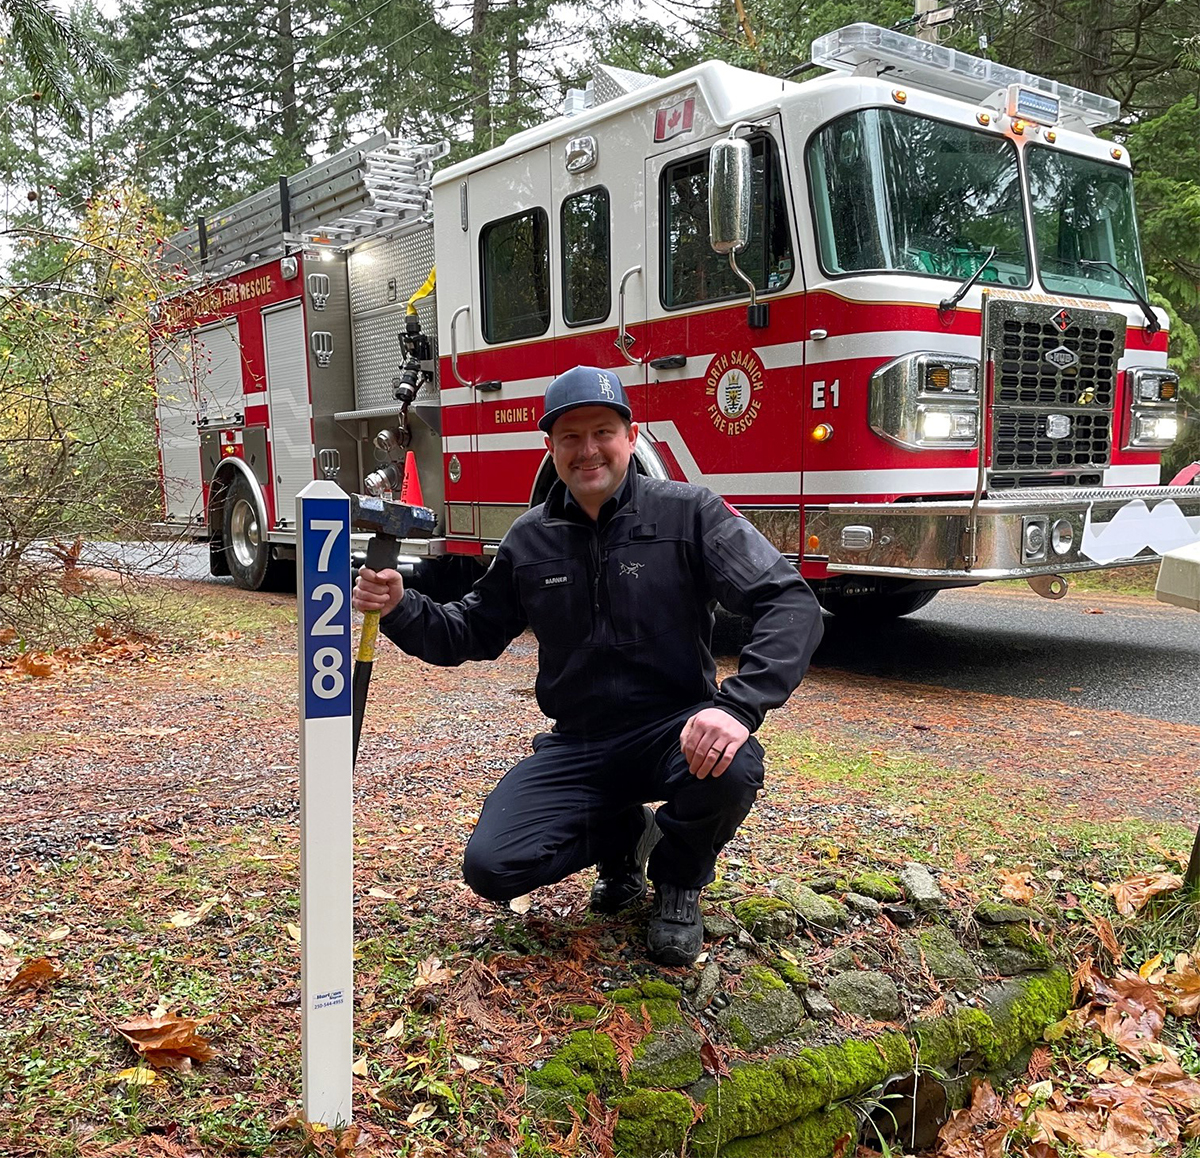 UH OH - Is your house number visible at night? A reflective address sign helps Emergency Crews find your home easier to provide needed assistance. For $65.00 we can install reflective signage for you. Purchase at the Wain Rd. Fire Hall, 986 Wain Road (8 am to 4 pm, Mon-Fri)